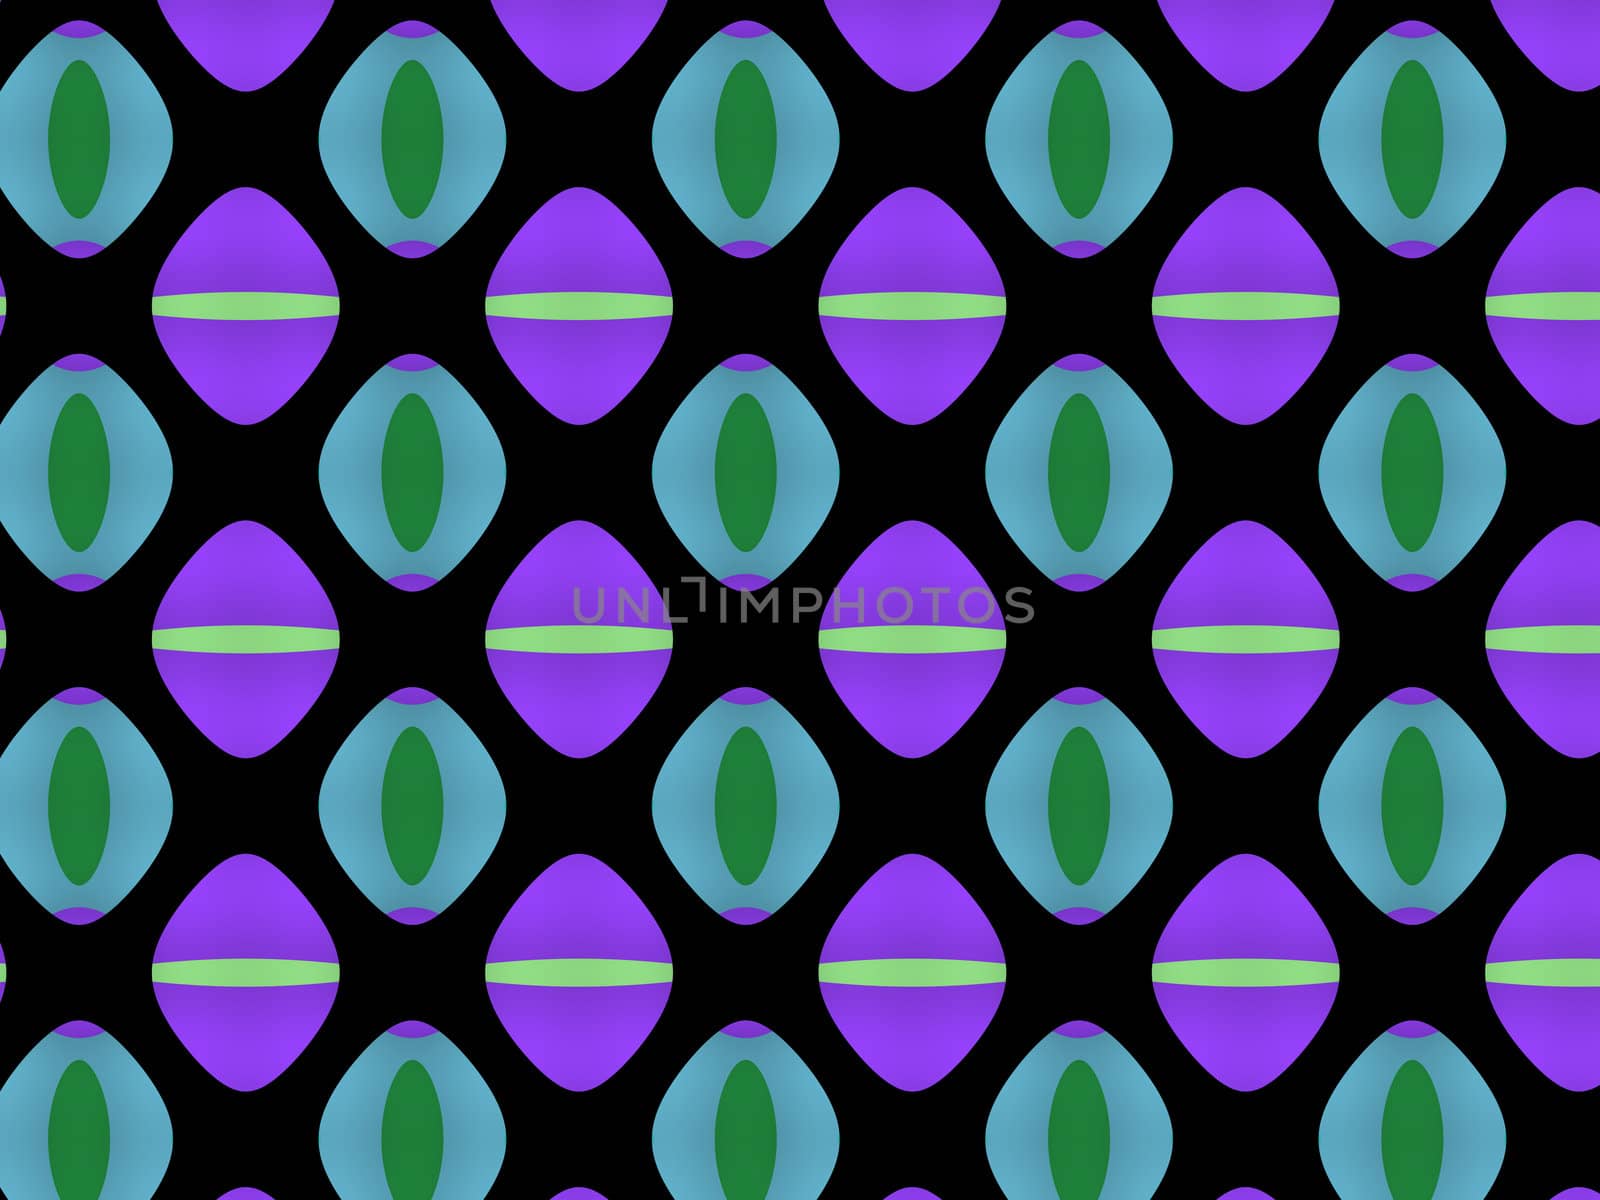 An abstract pattern of Easter egg shaped spots on a black background. The pattern is done in shades of green and purple.